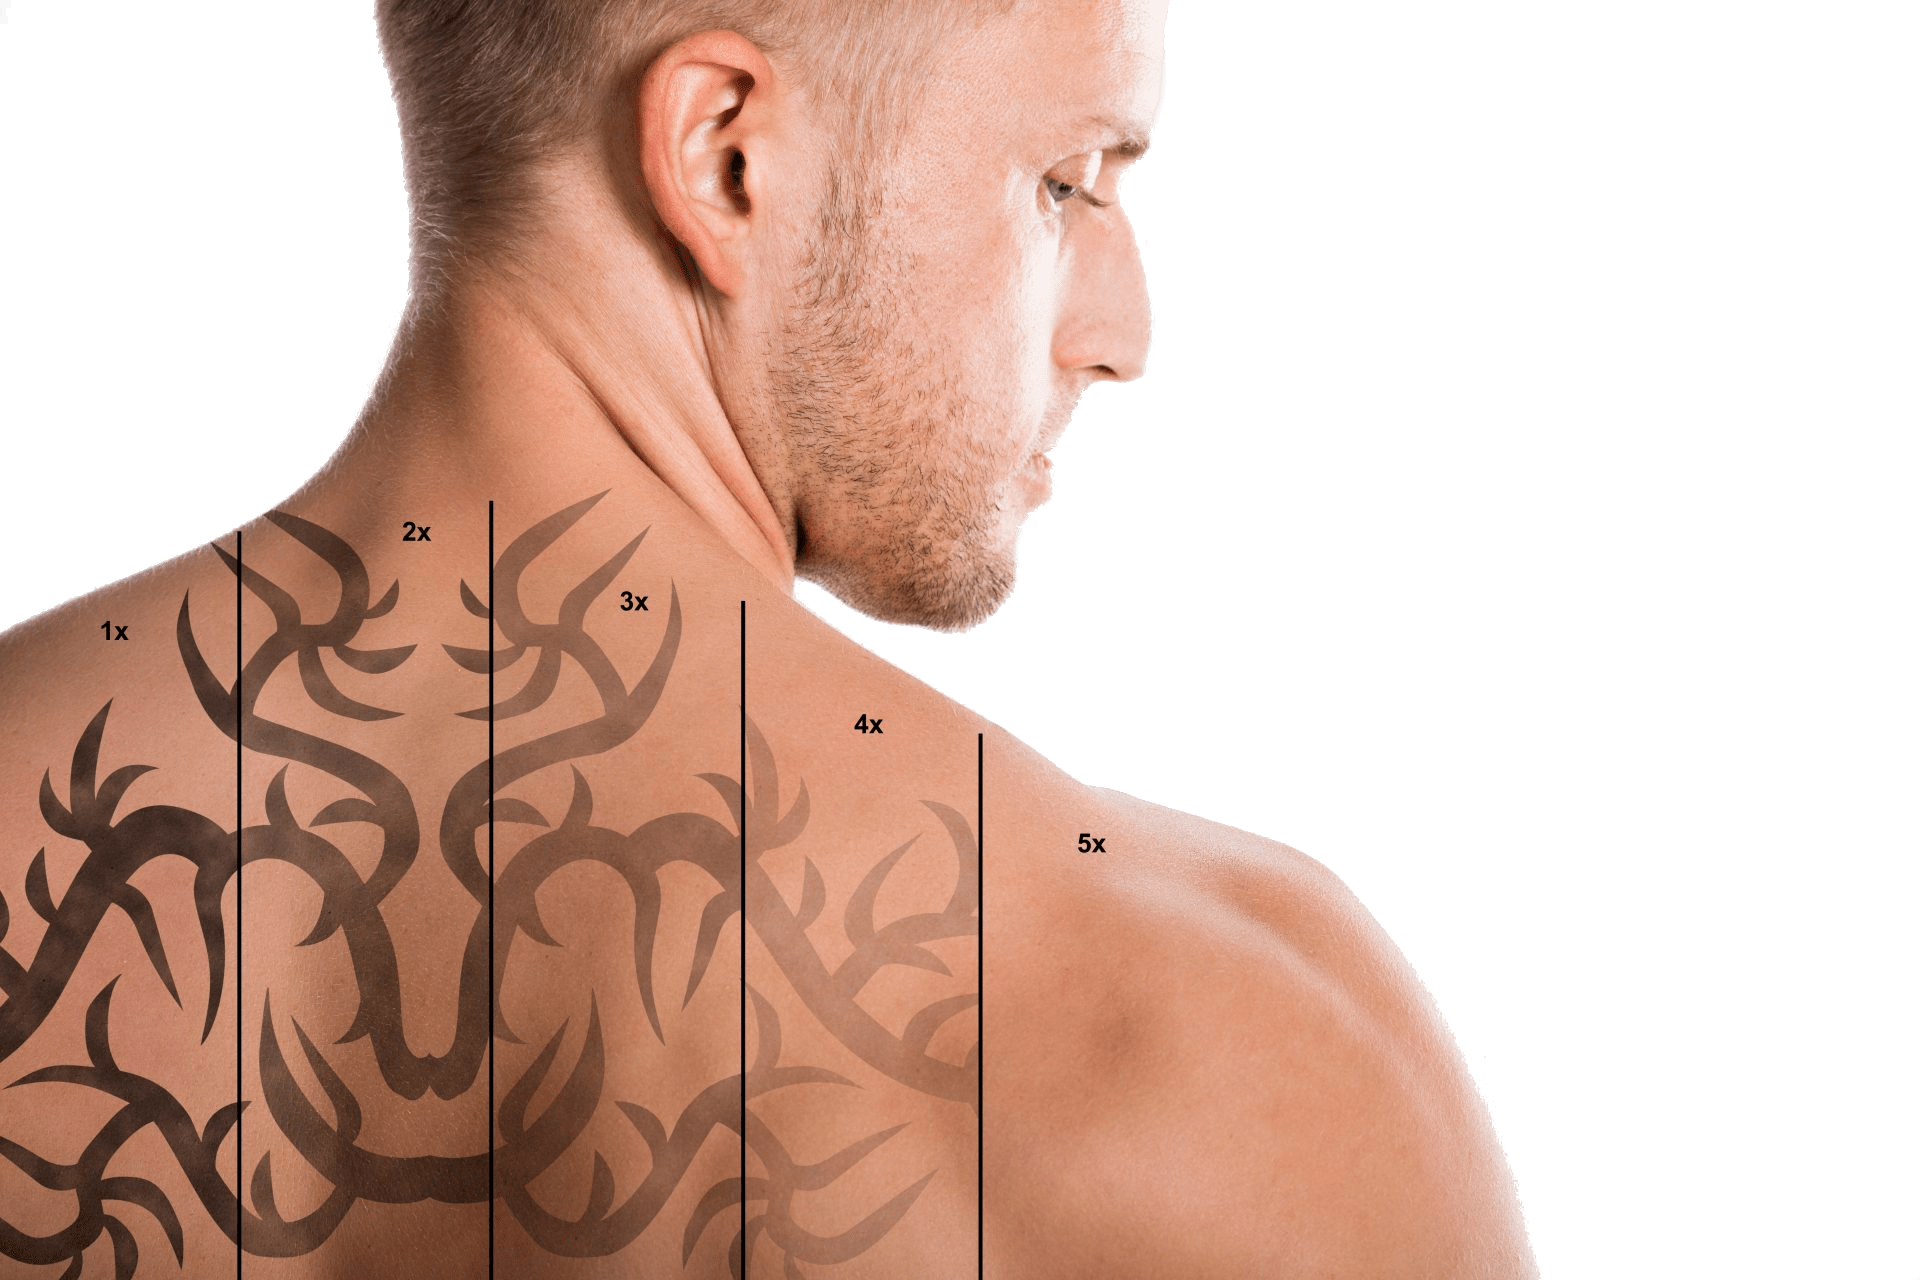 Tattoo removal using medical lasers in Prague